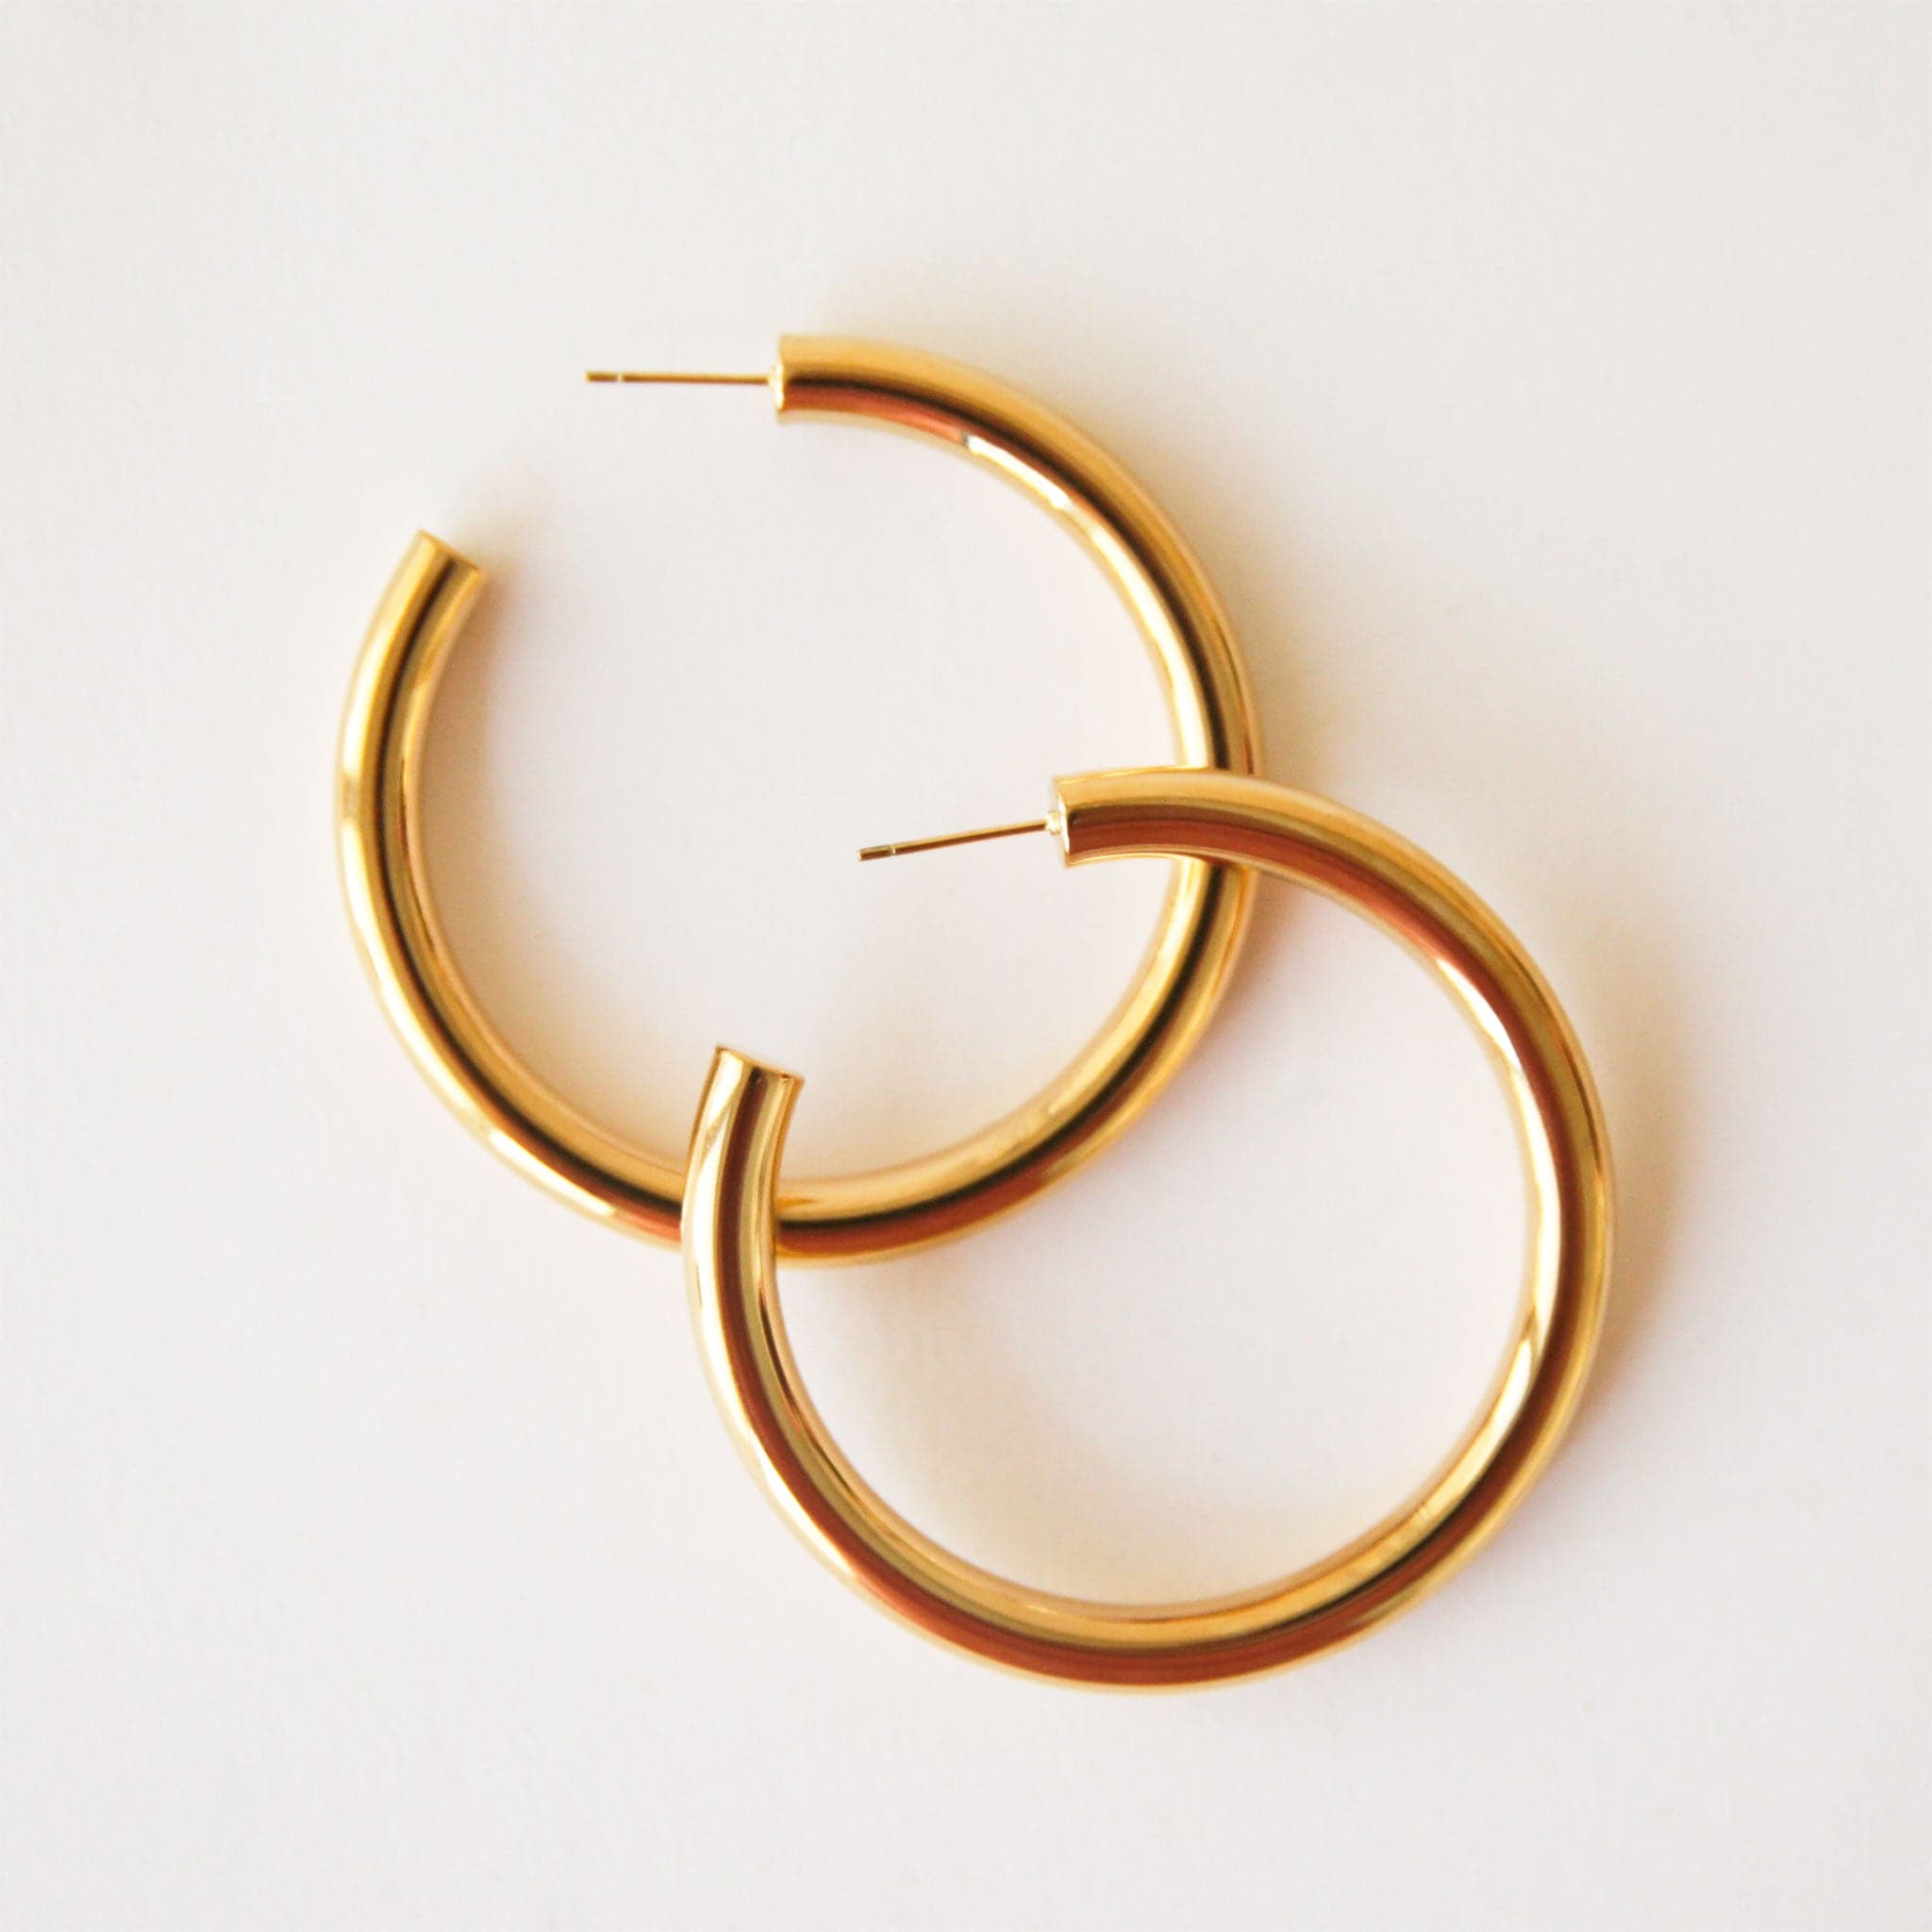 A chunky gold hoop earring with a straight backing and an open hoop.